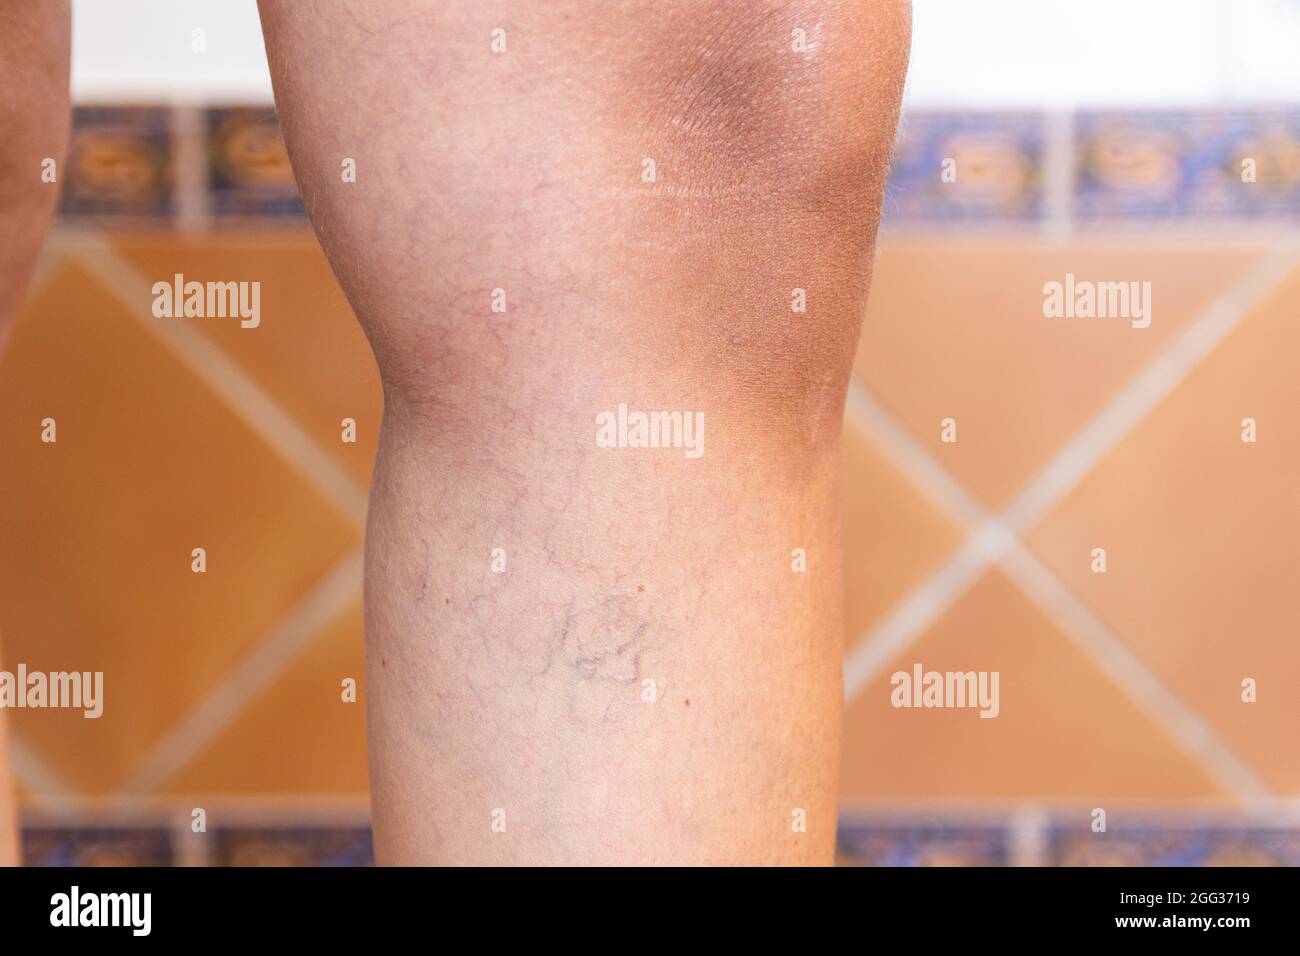 Adult woman's leg with varicose veins Stock Photo